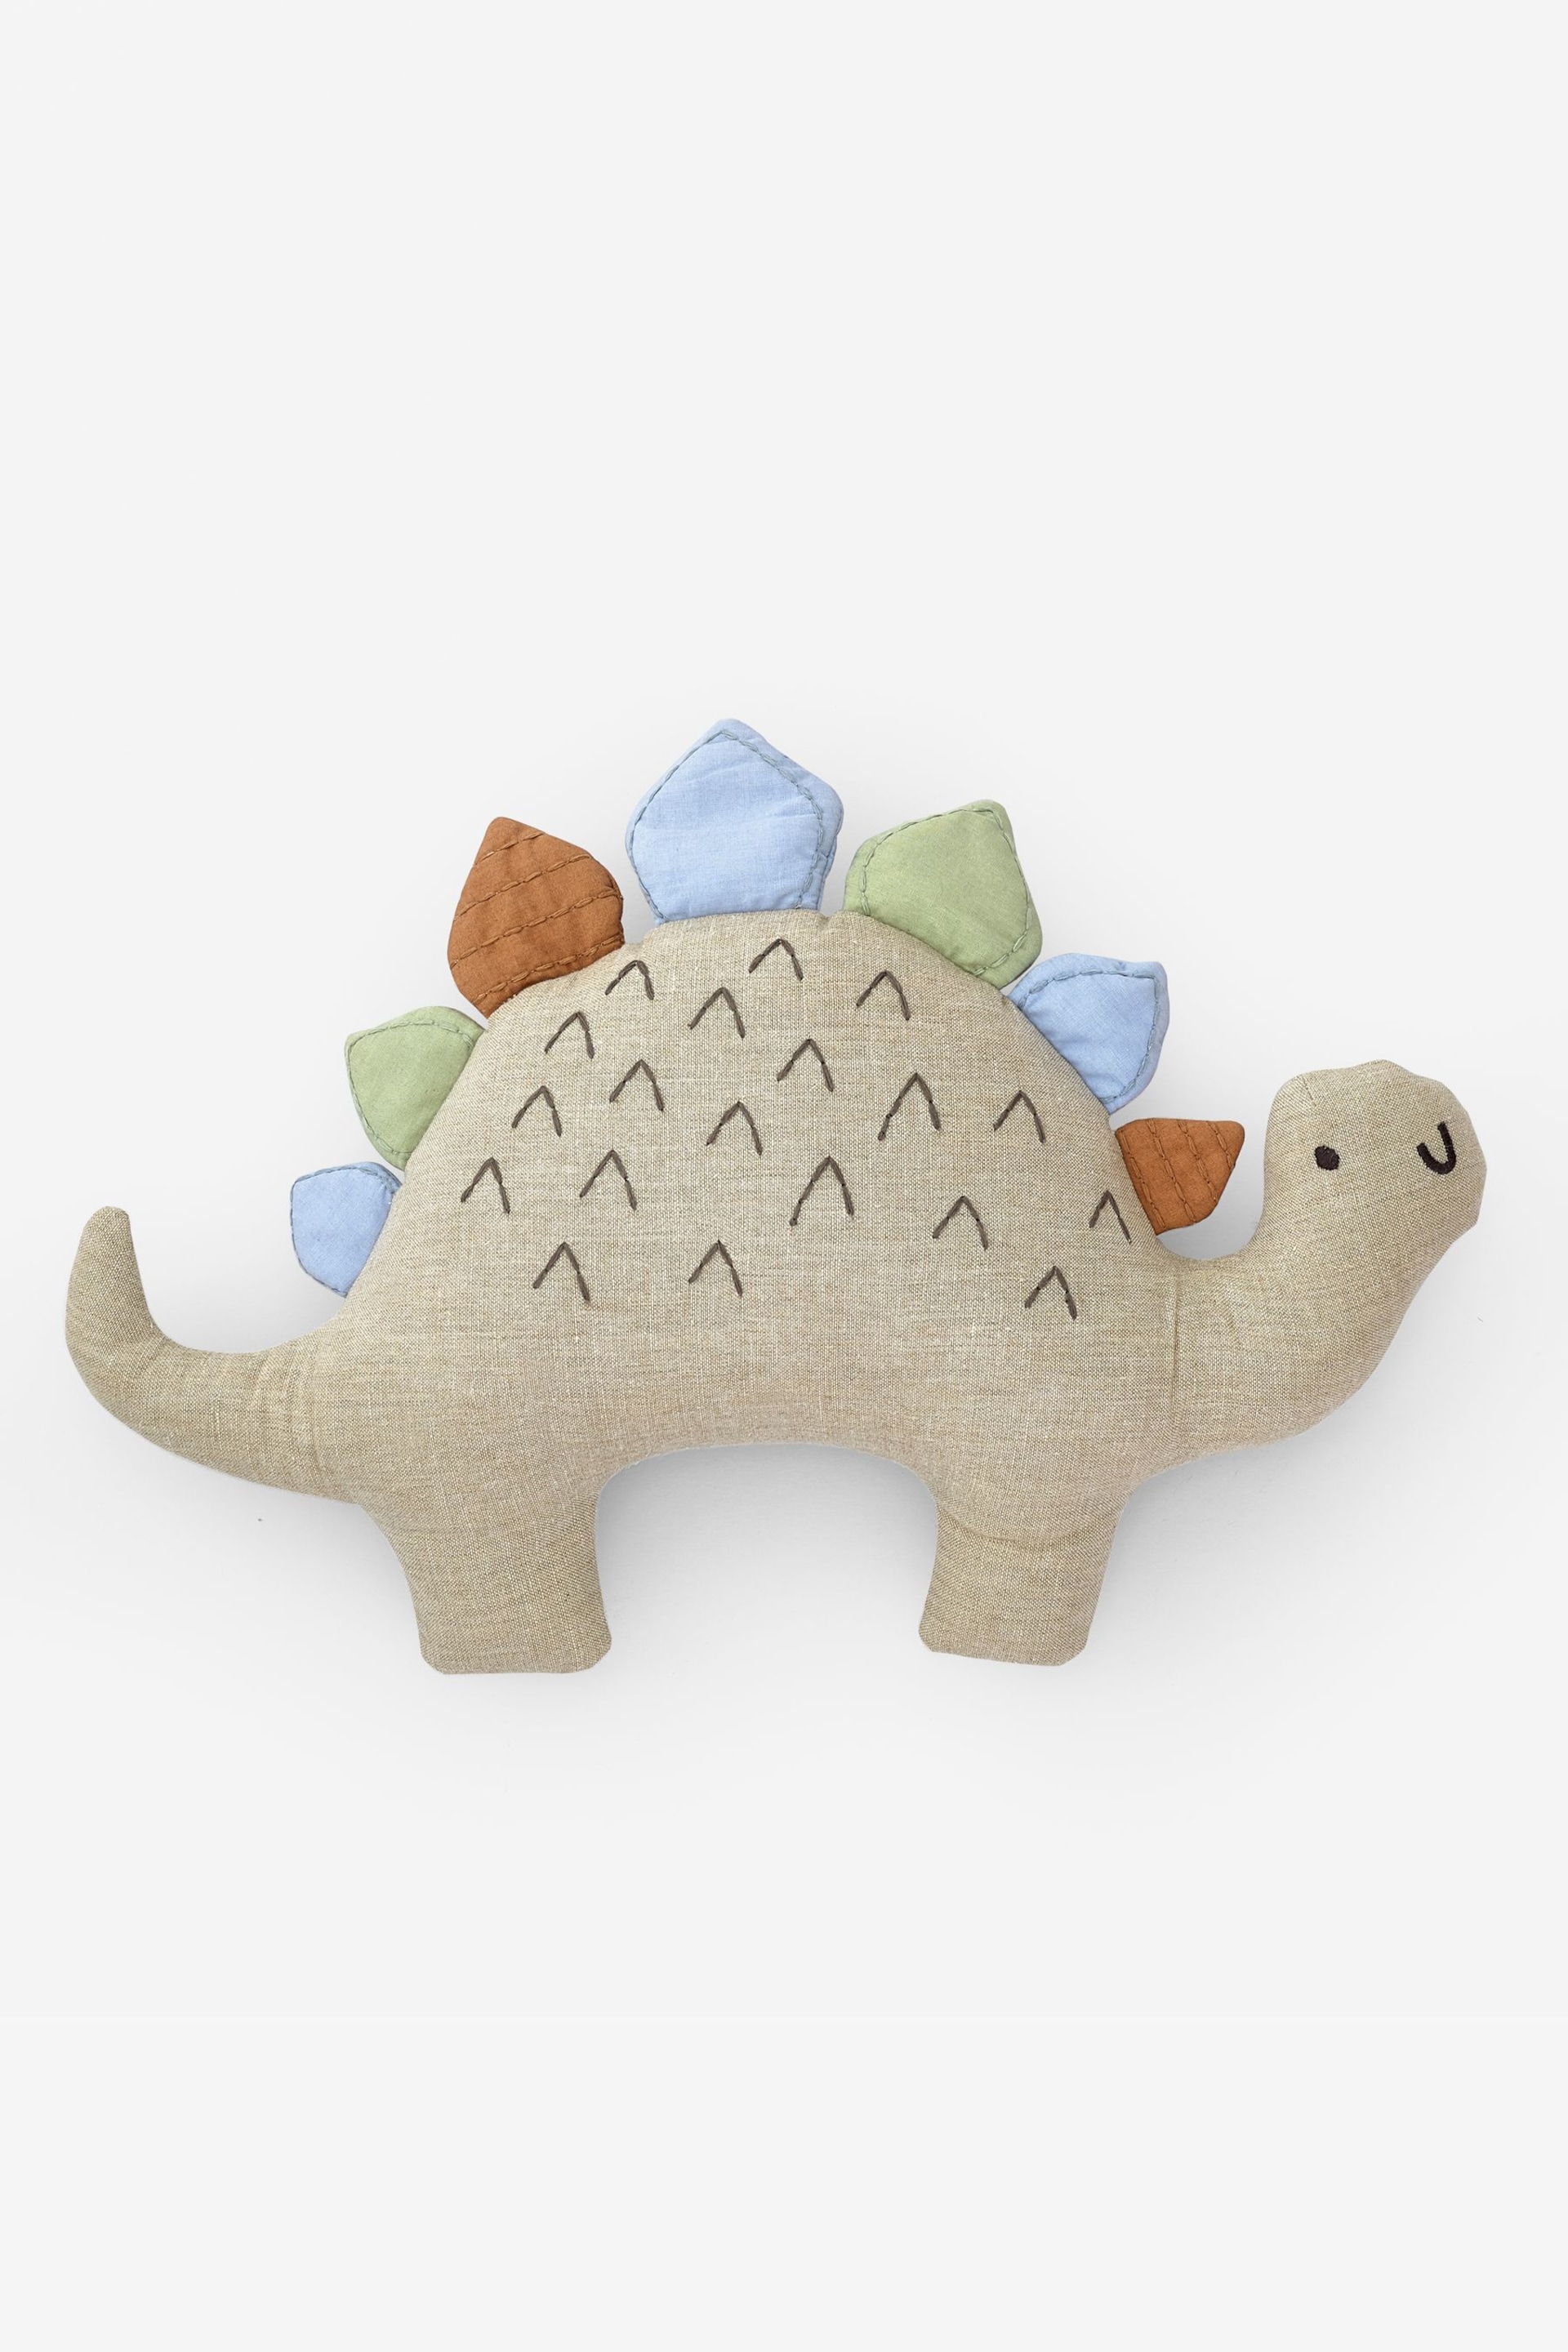 Natural Embroidered Dinosaur Toy Cushion - Image 4 of 4